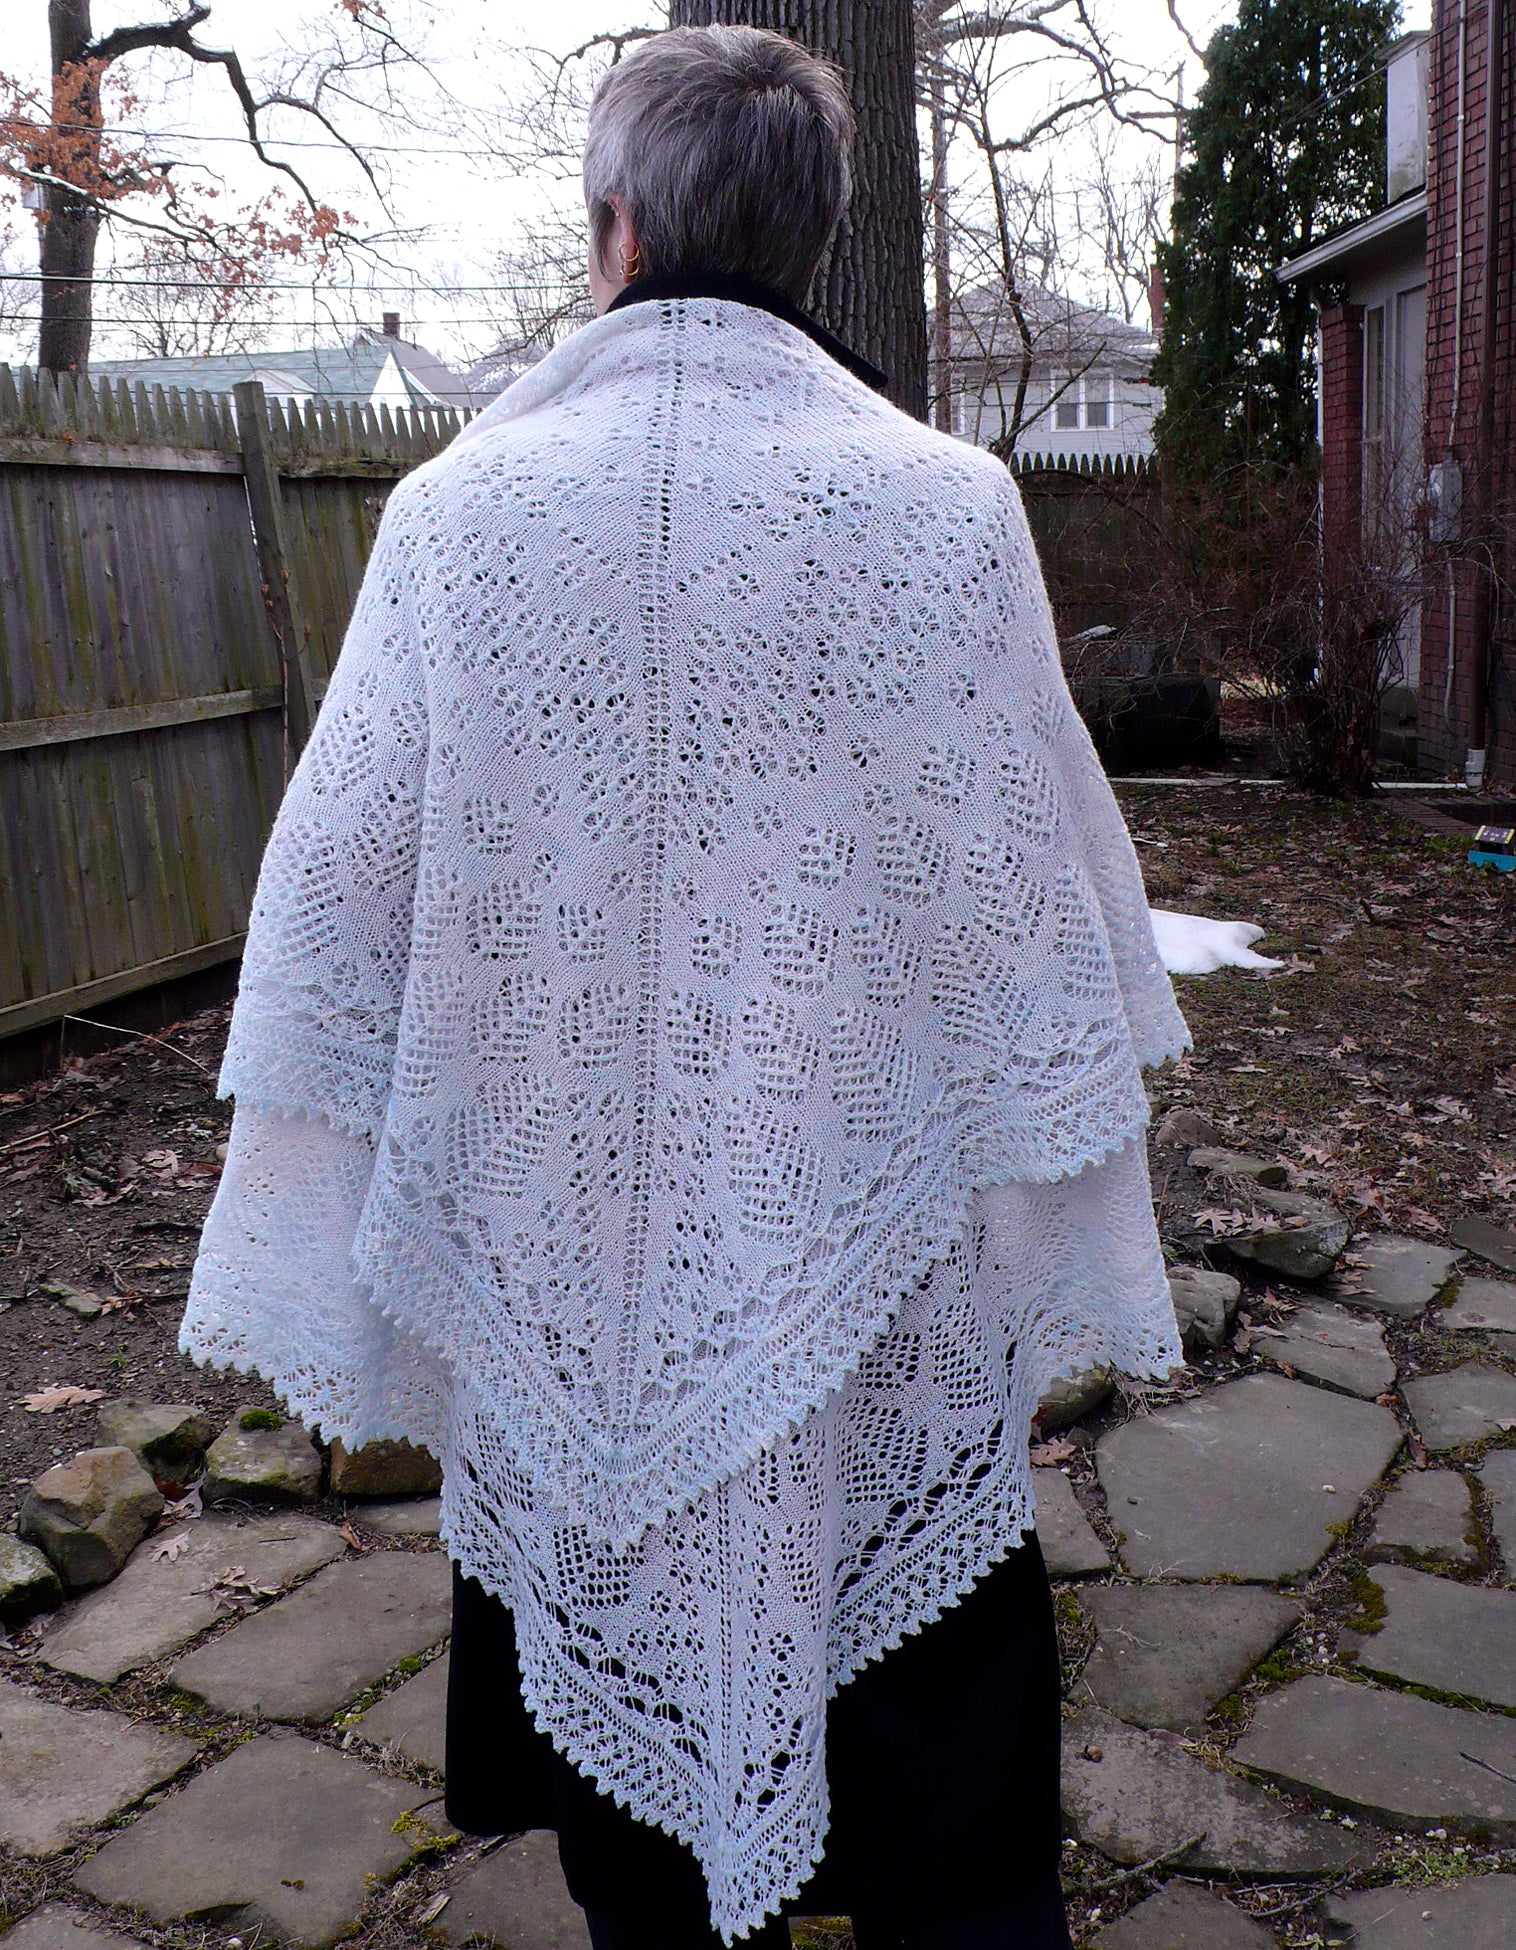 Snowflakes in Cedarwoods Lace Shawl